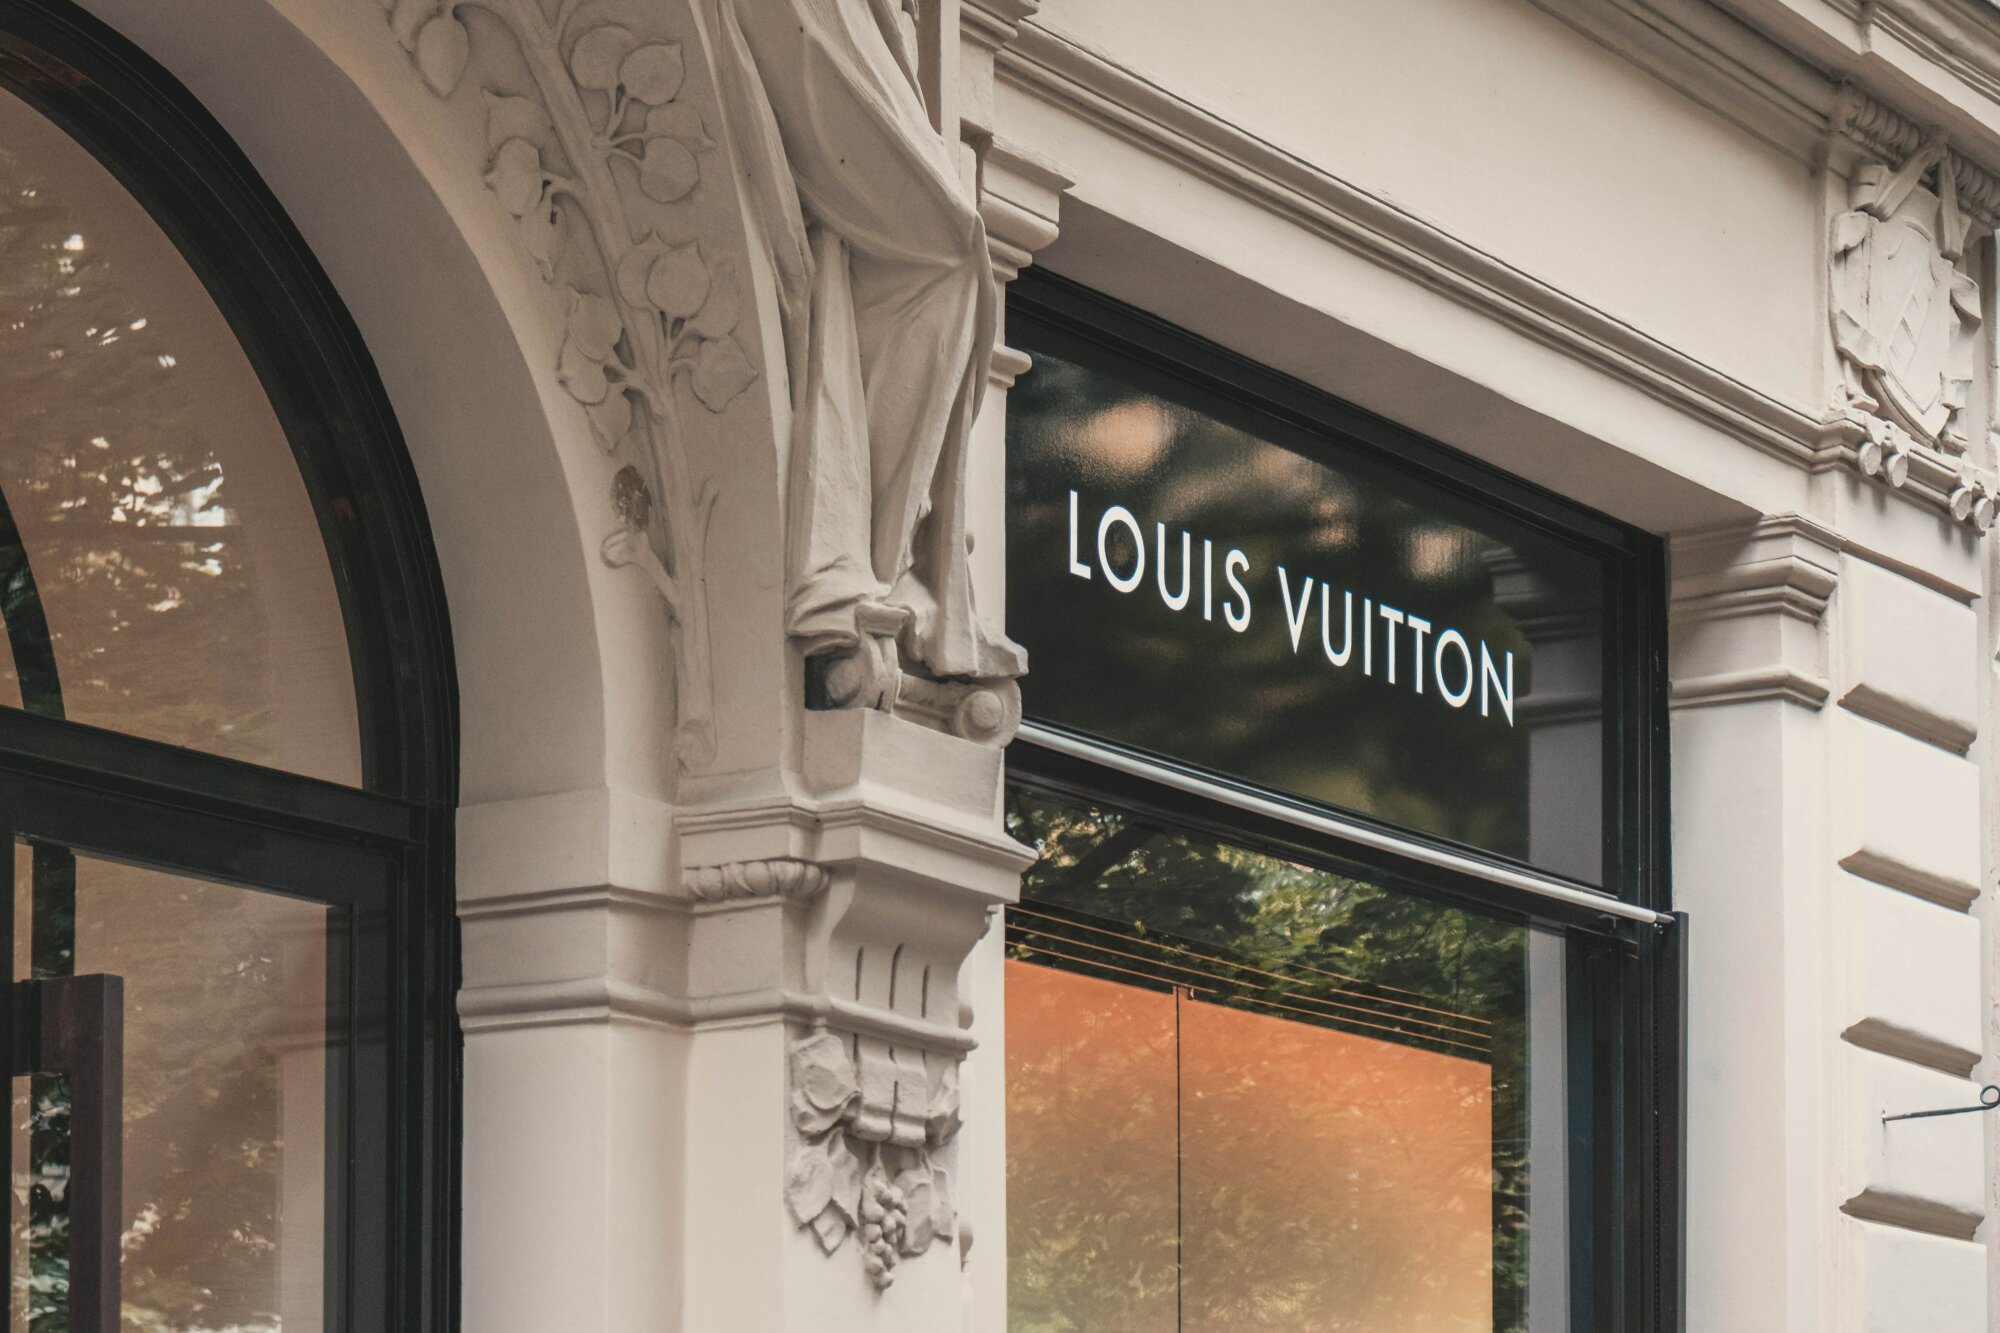 Louis Vuitton Places 1st in Luxury Brand Reputation Index